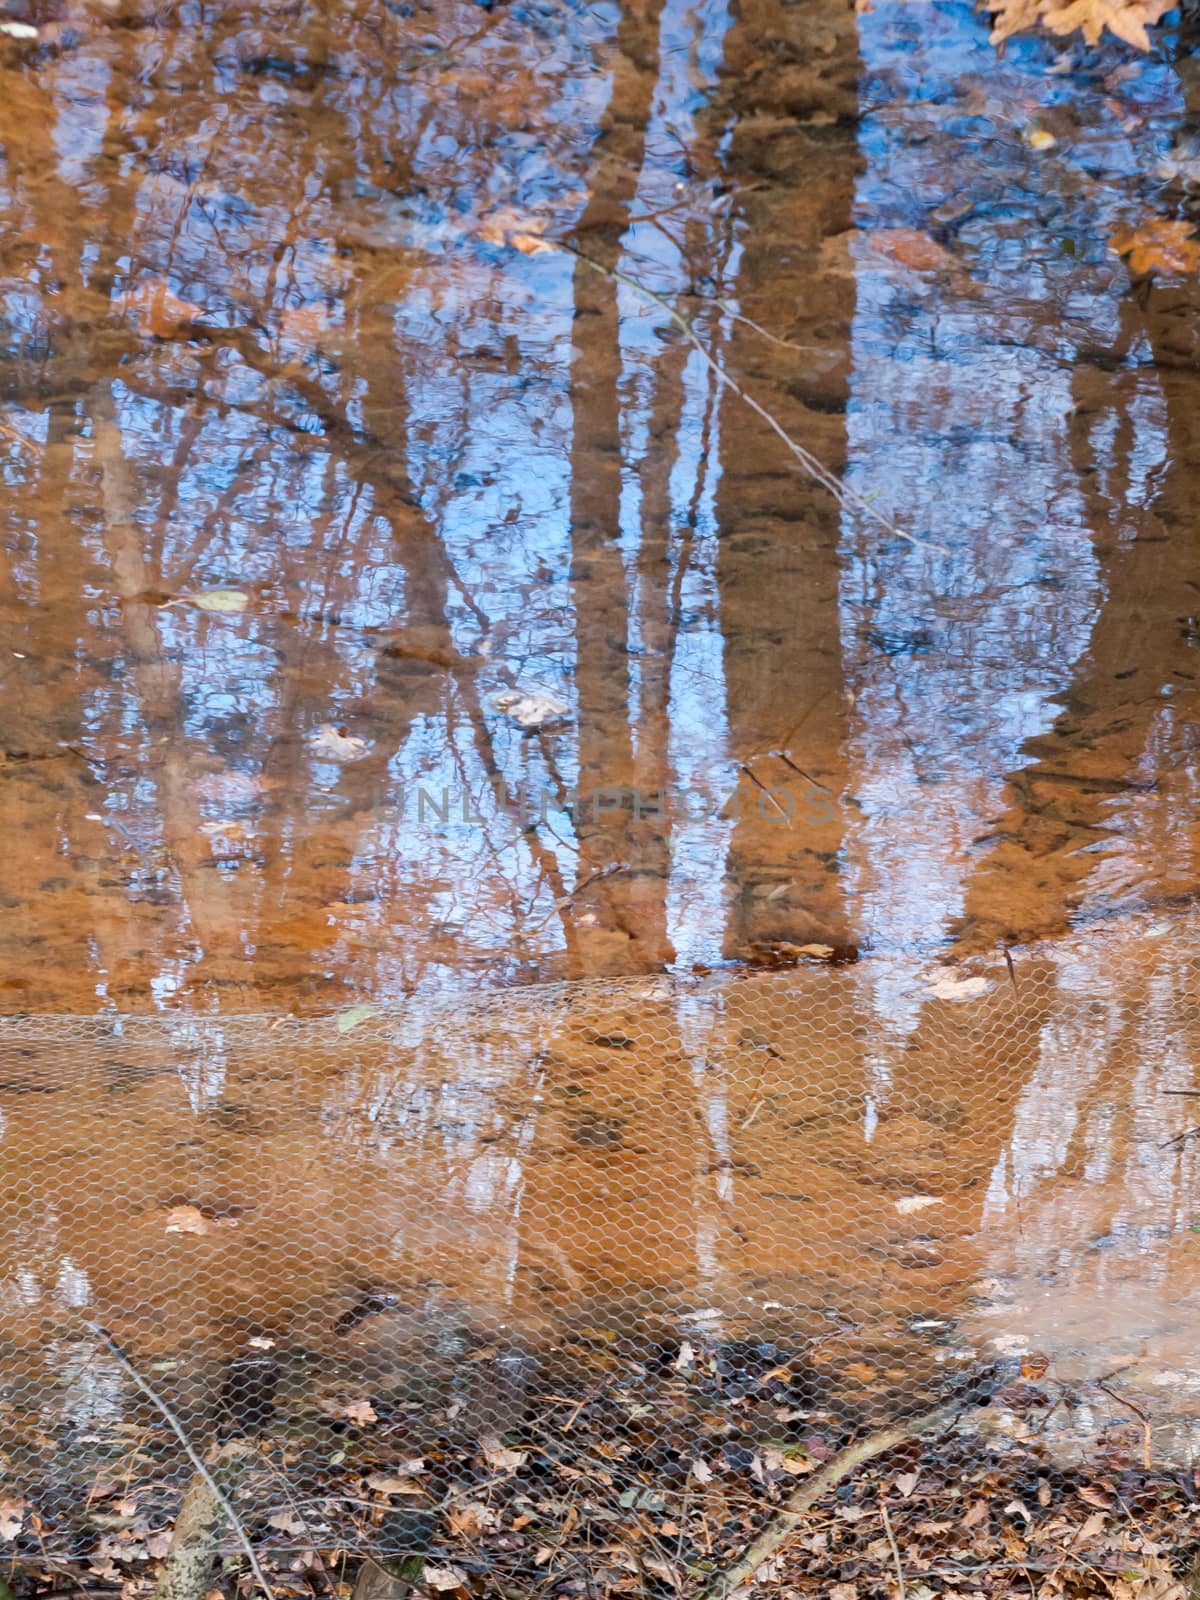 autumn brown dead leaves near lake surface water dreary reflecti by callumrc